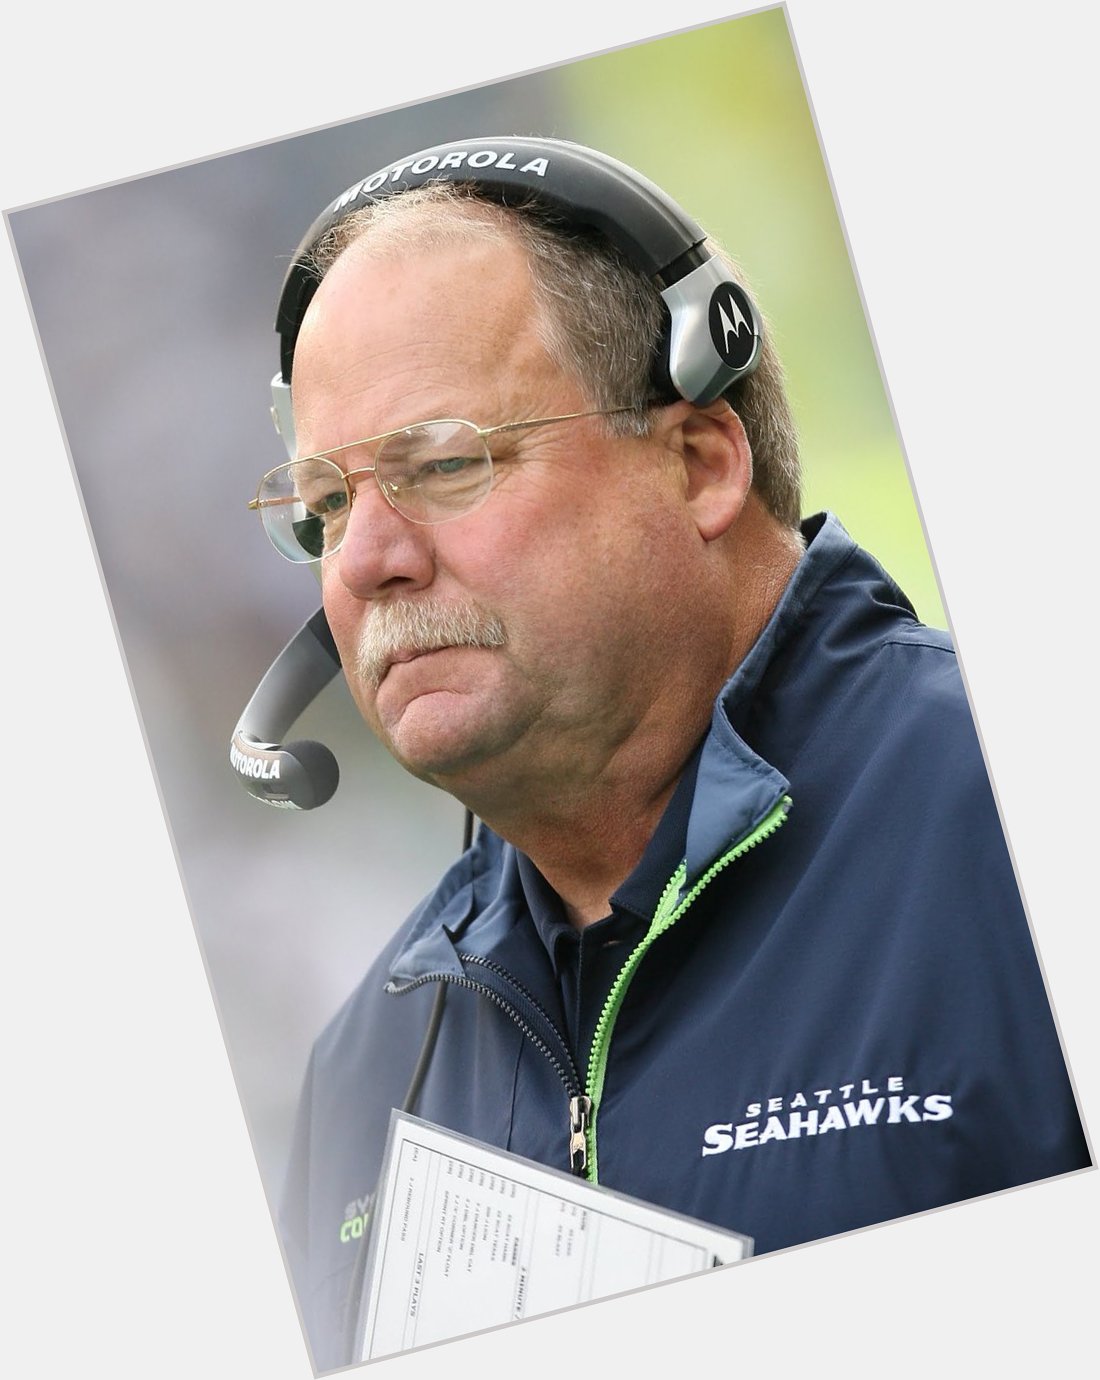 Happy 74th birthday to Mike Holmgren! Where does his mustache rank on the all-time sports mustaches list? 